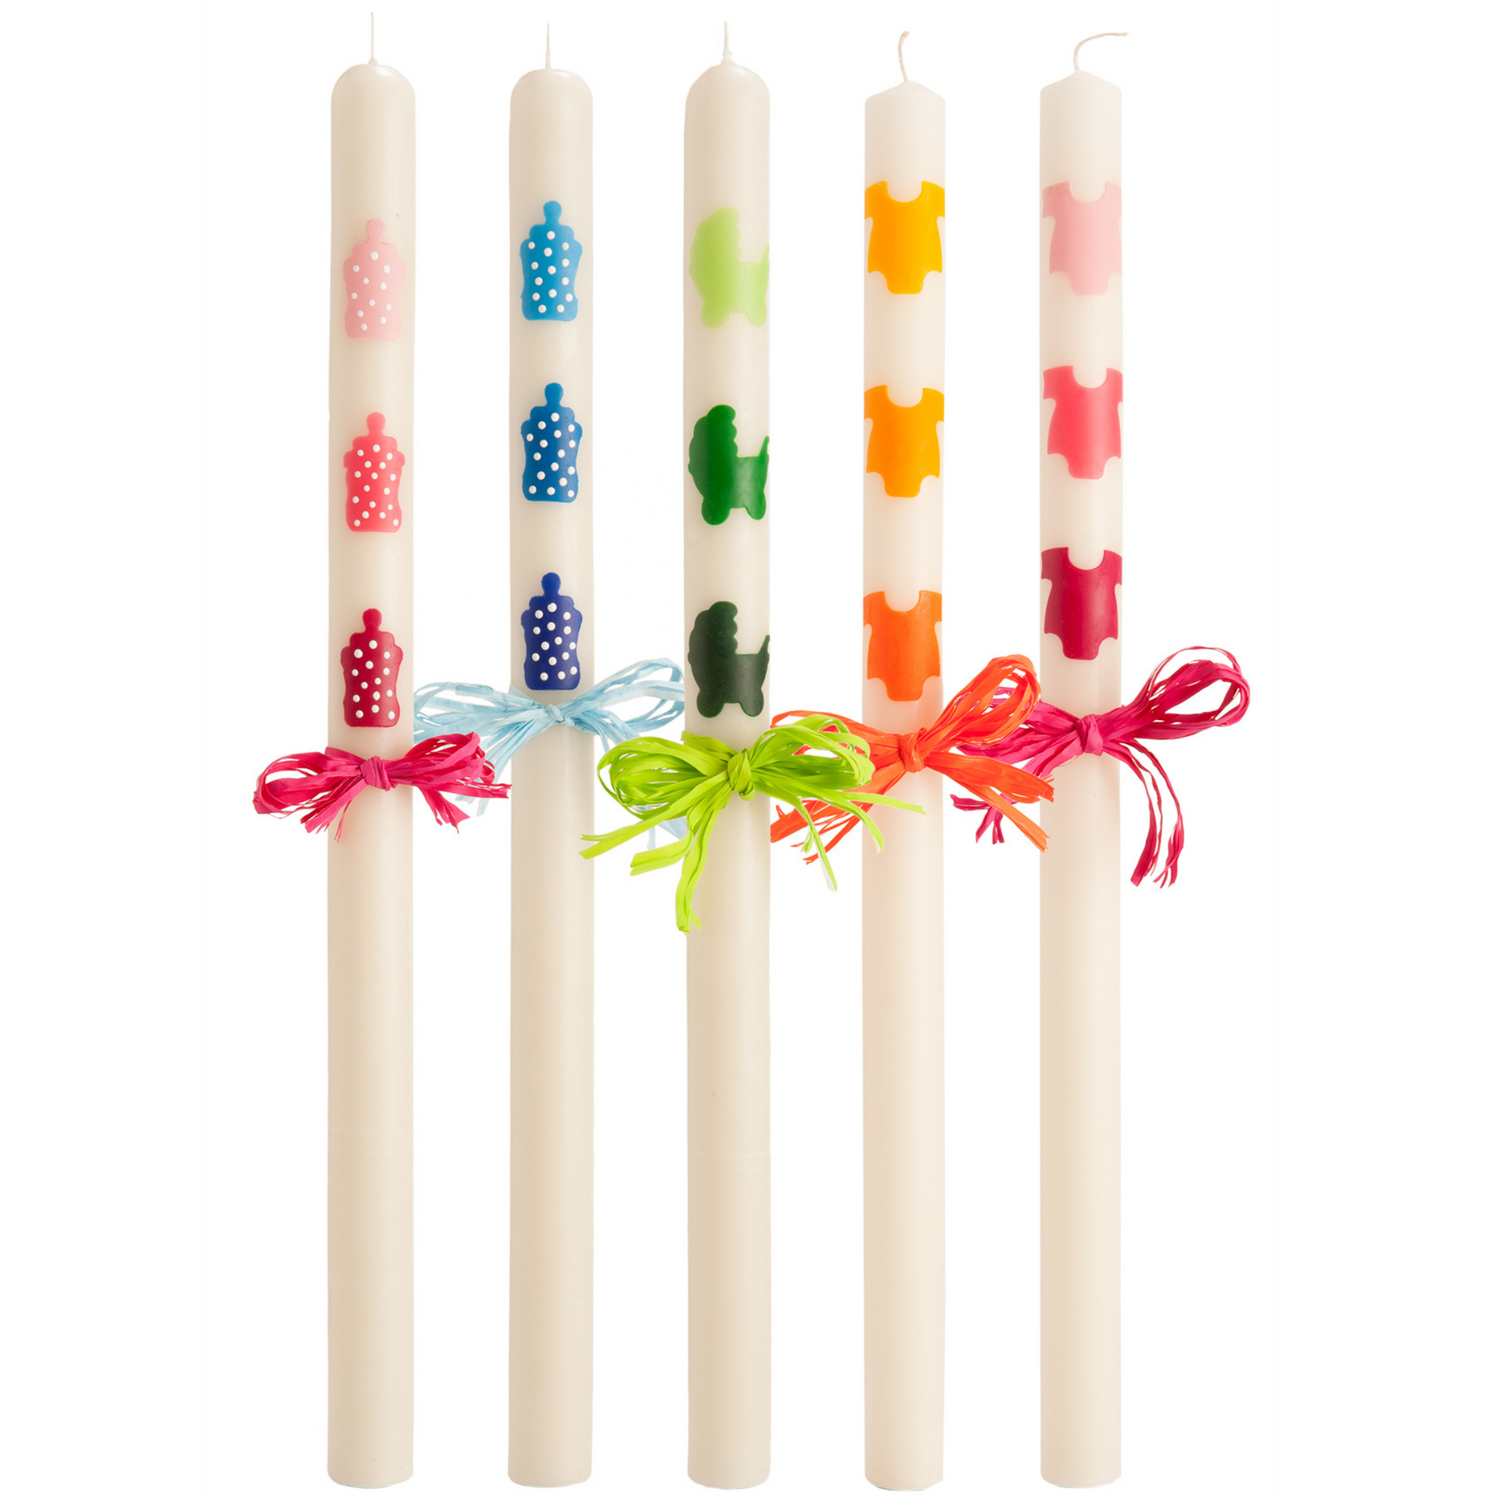 Baptism and Communion candles